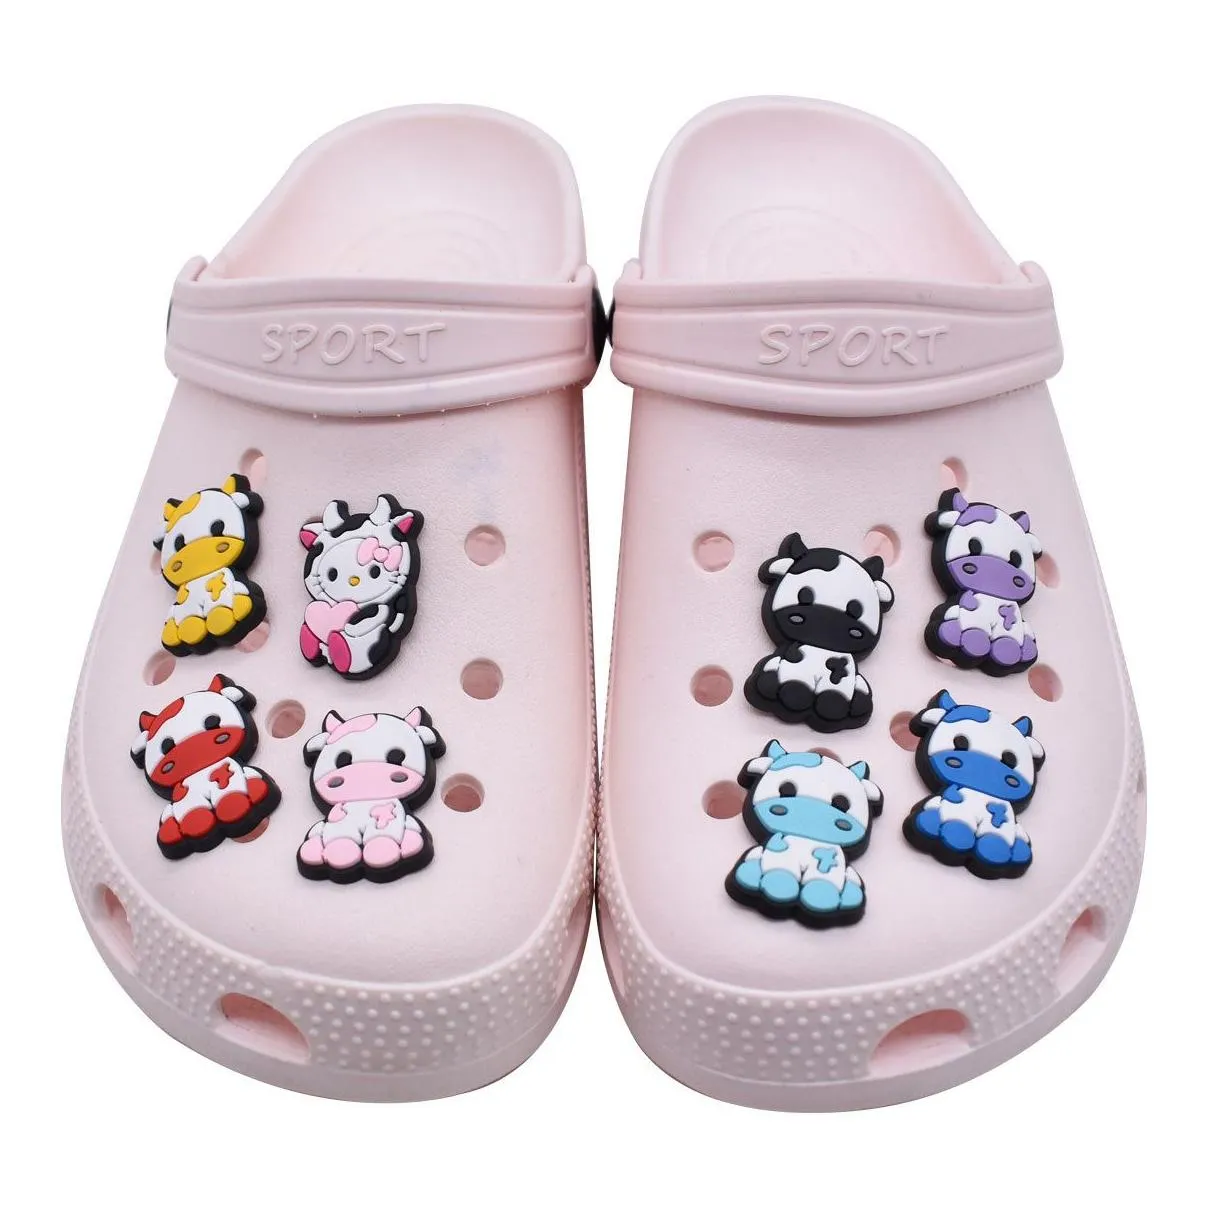 Anime charms wholesale childhood memories milk cows funny gift cartoon charms shoe accessories pvc decoration buckle soft rubber clog